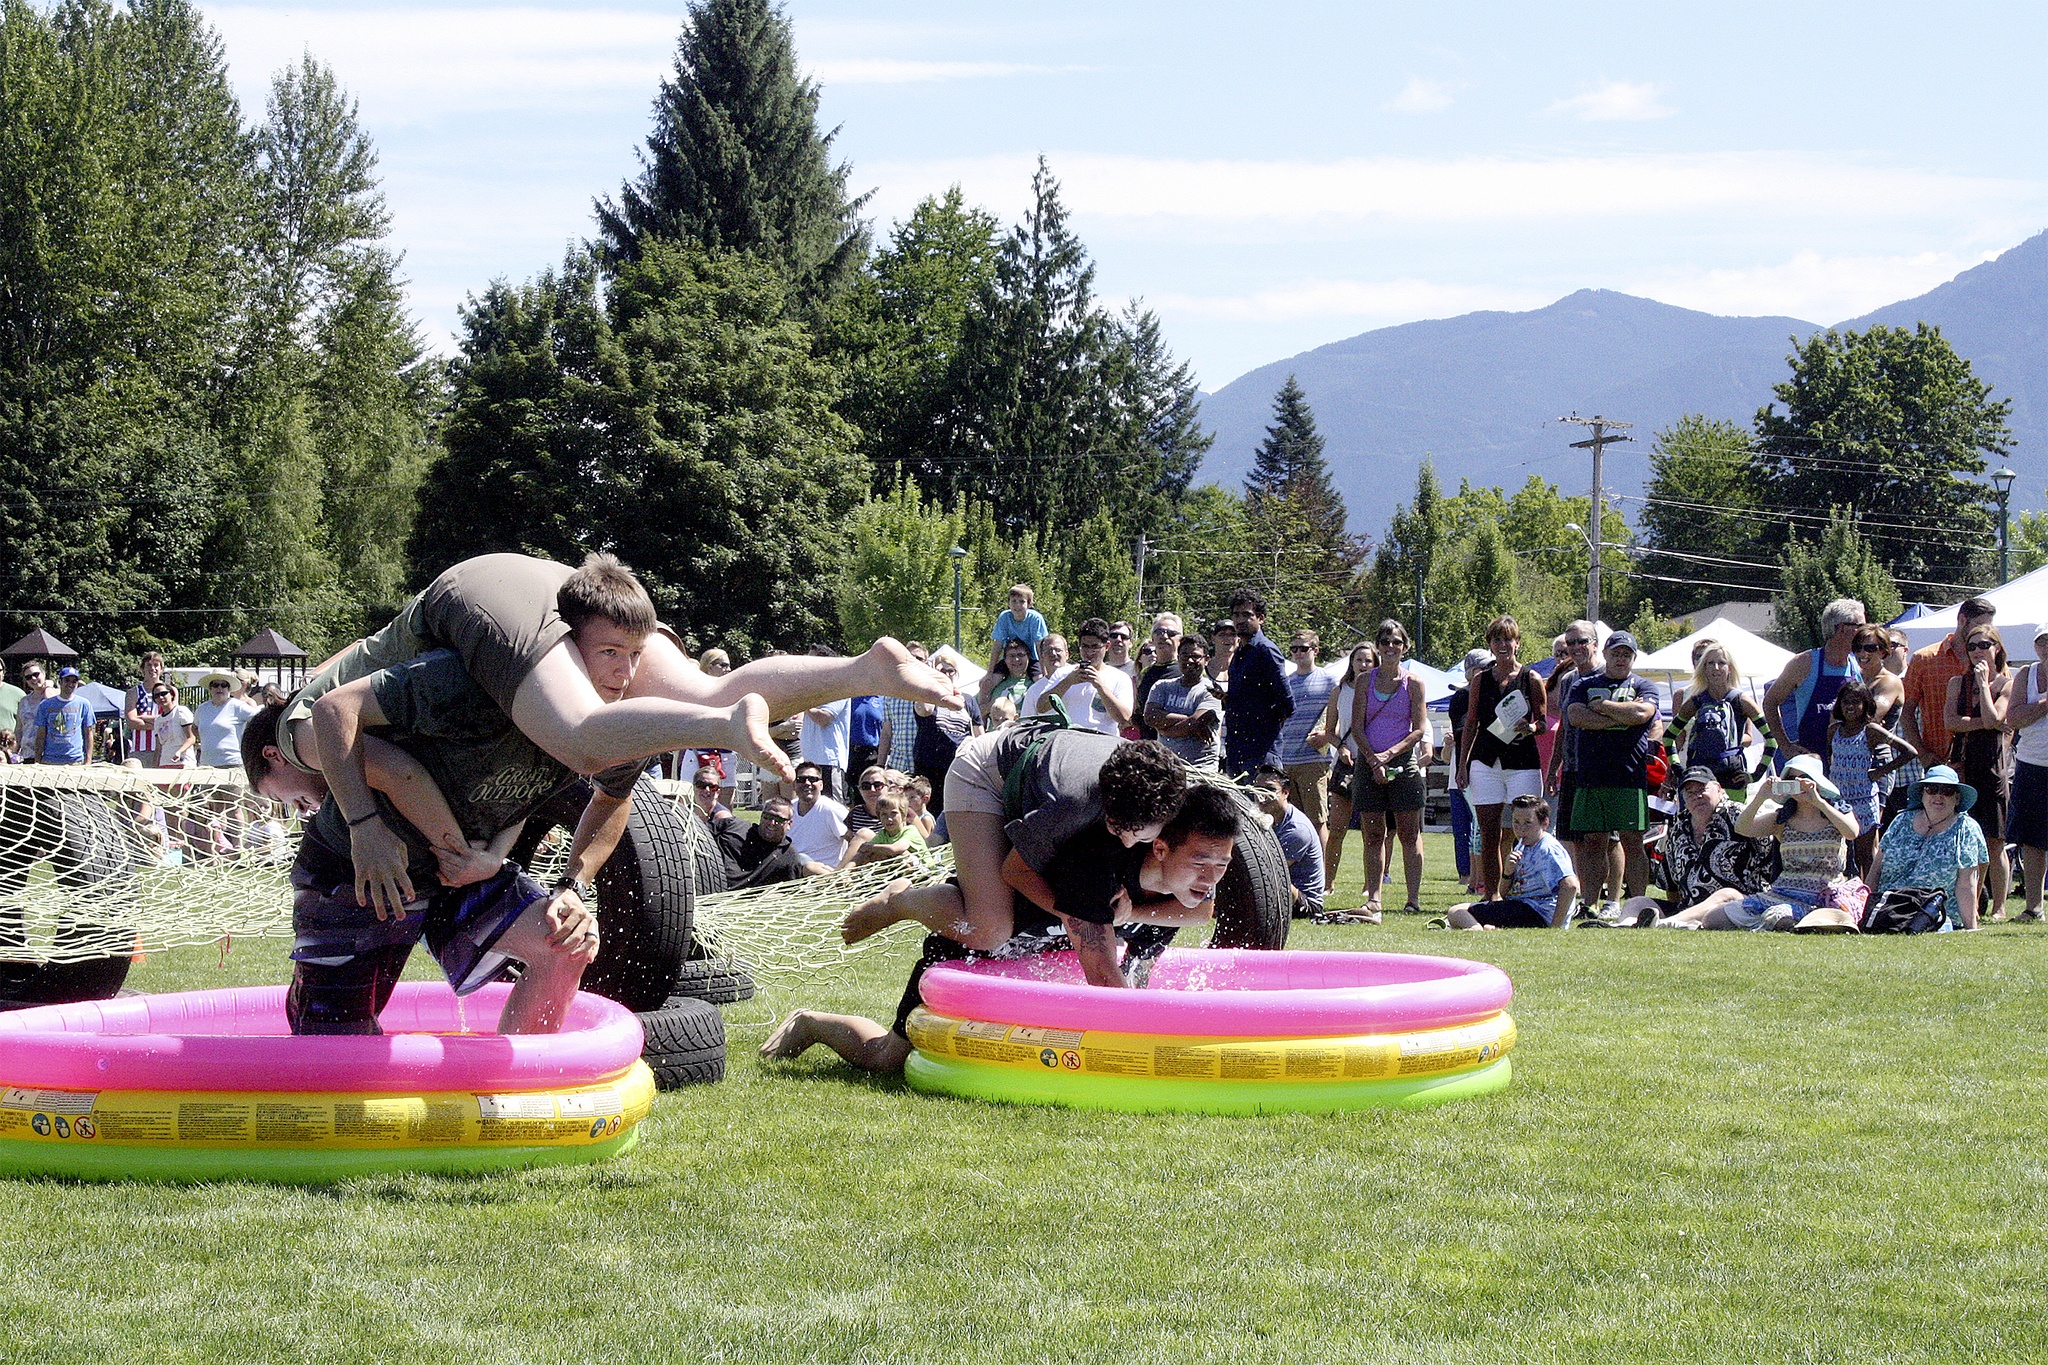 Evan Pappas/Staff PhotoCouples compete in the popular wife-carrying race during 2015’s Festival at Mount Si.